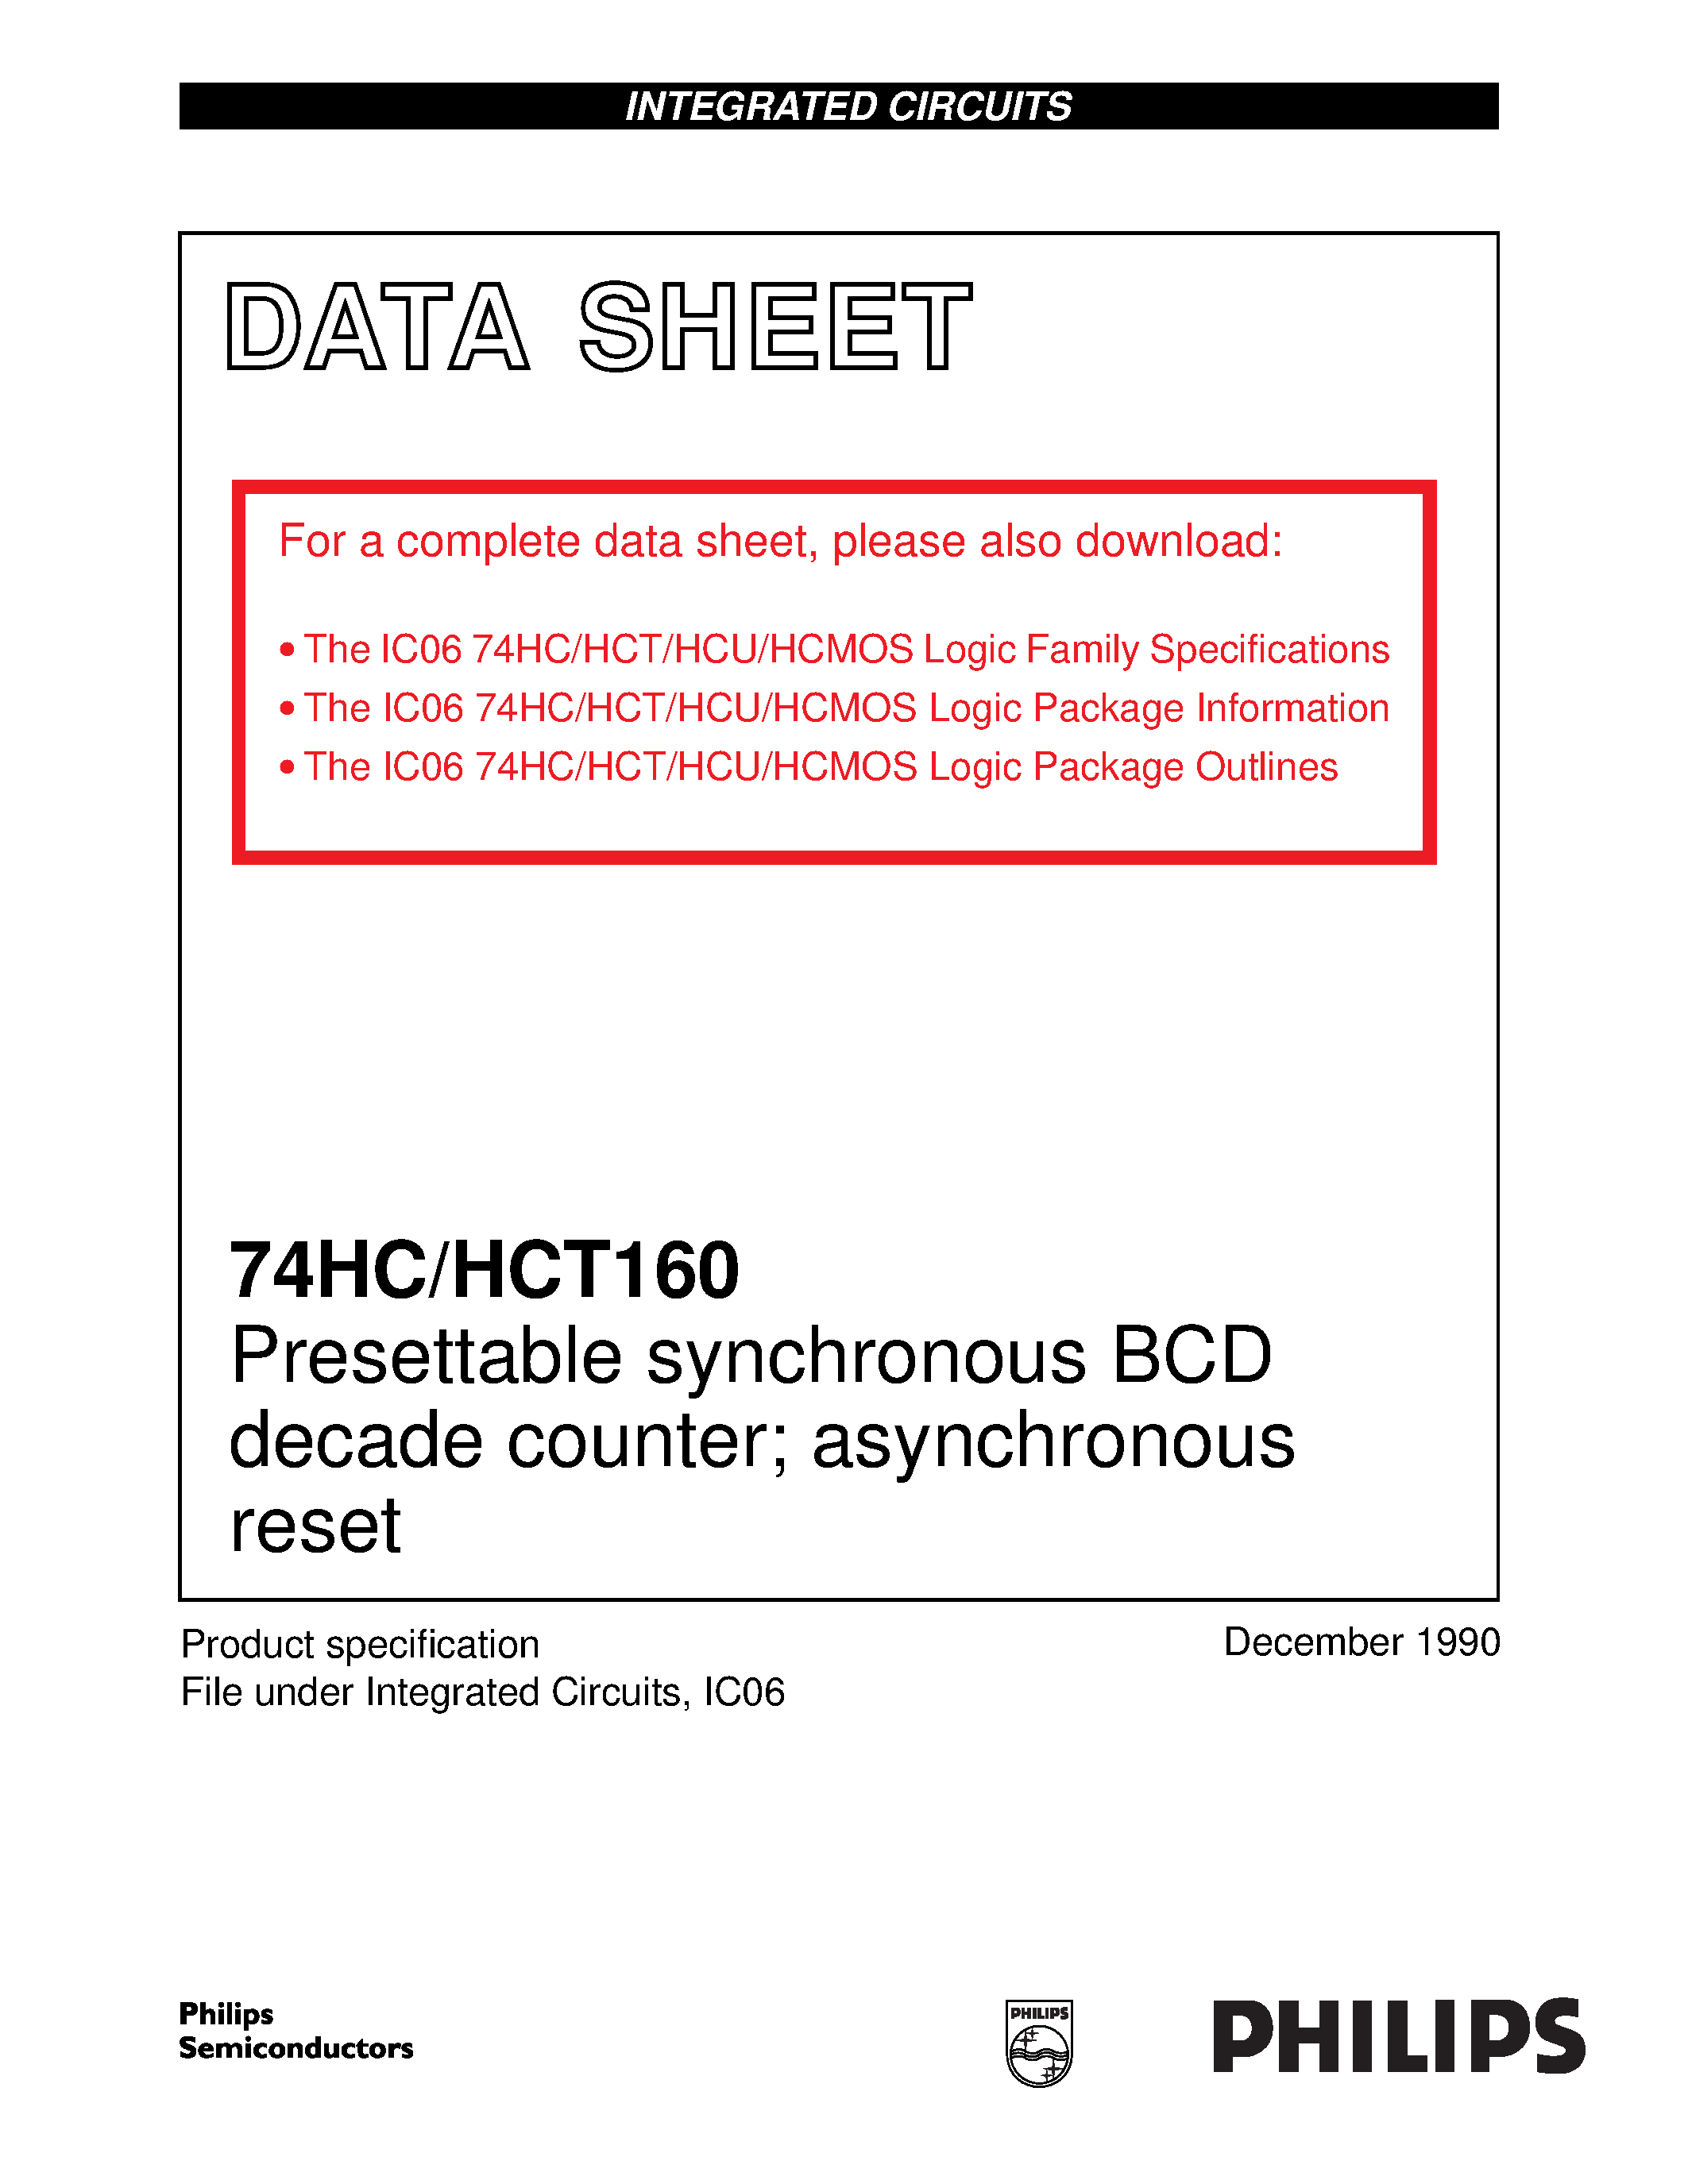 Datasheet 74HCT160 - Presettable synchronous BCD decade counter asynchronous reset page 1